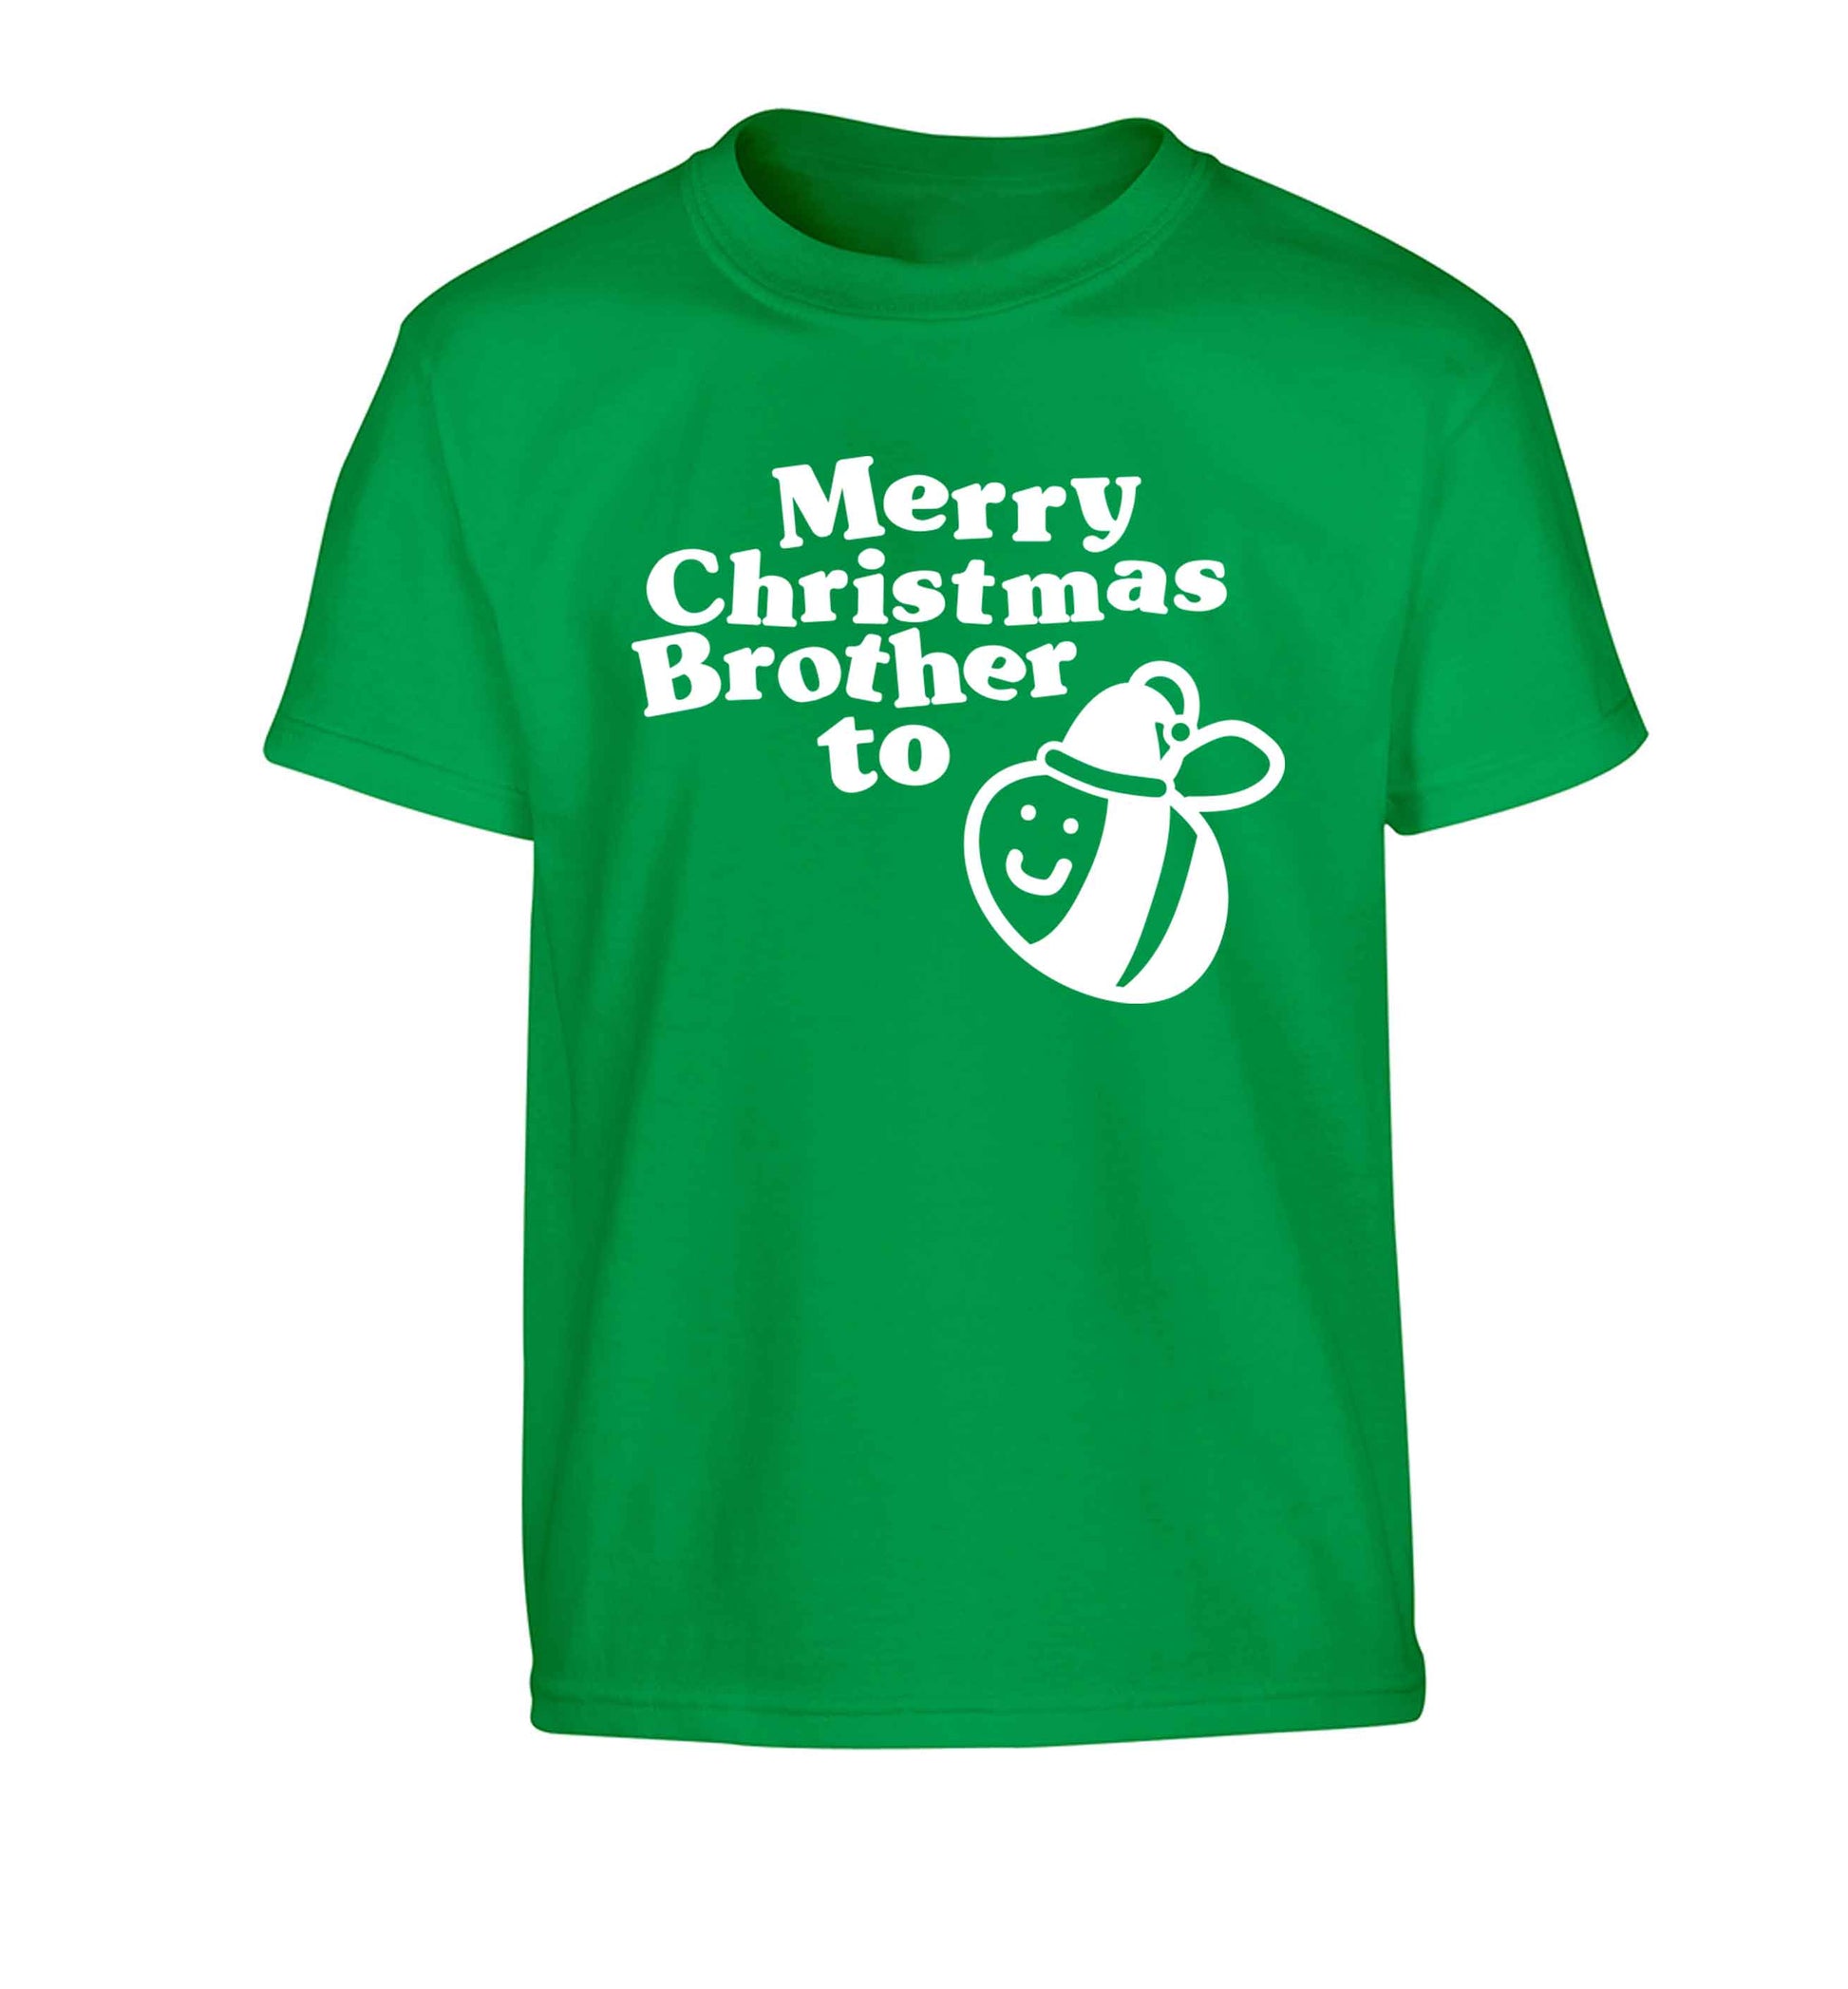 Merry Christmas brother to be Children's green Tshirt 12-13 Years